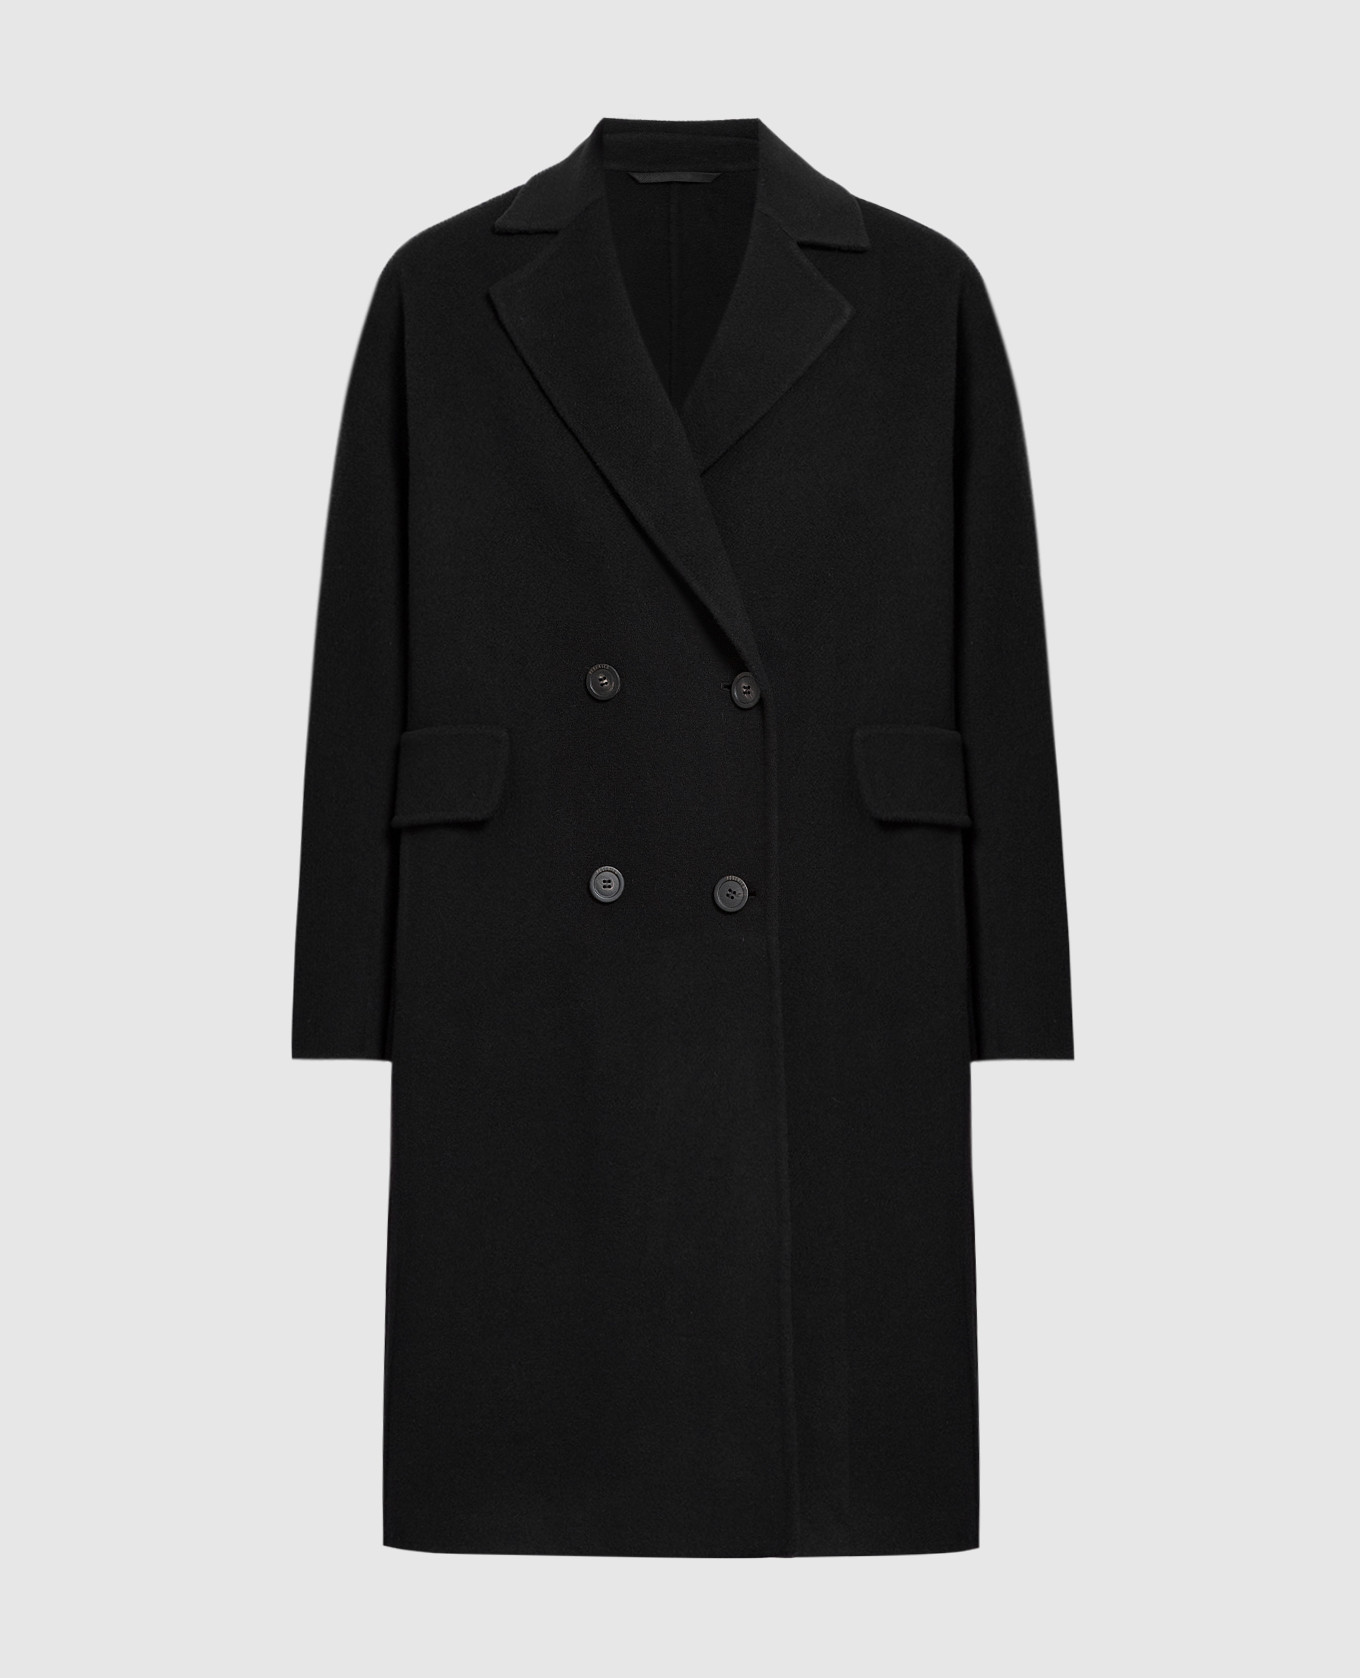 Black double-breasted wool and cashmere coat